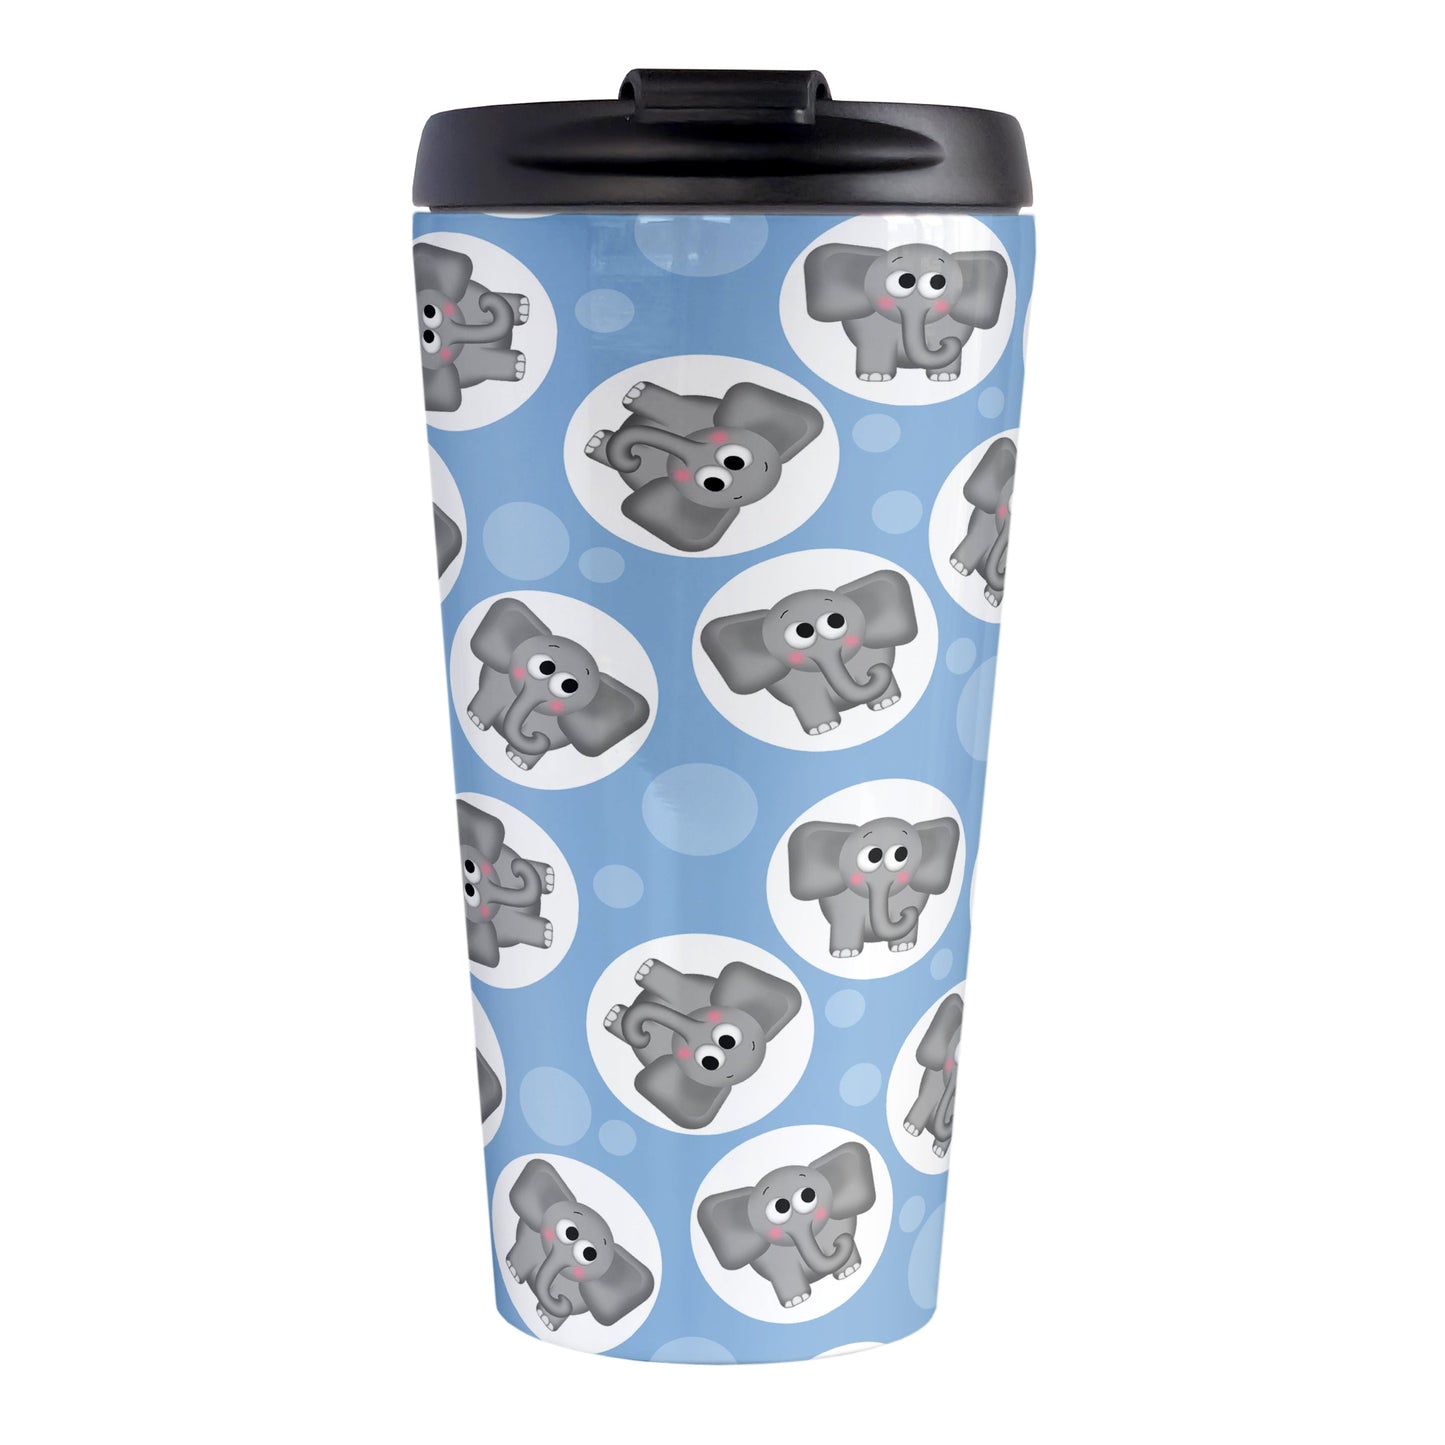 Cute Blue Elephant Pattern Travel Mug (15oz, stainless steel insulated) at Amy's Coffee Mugs